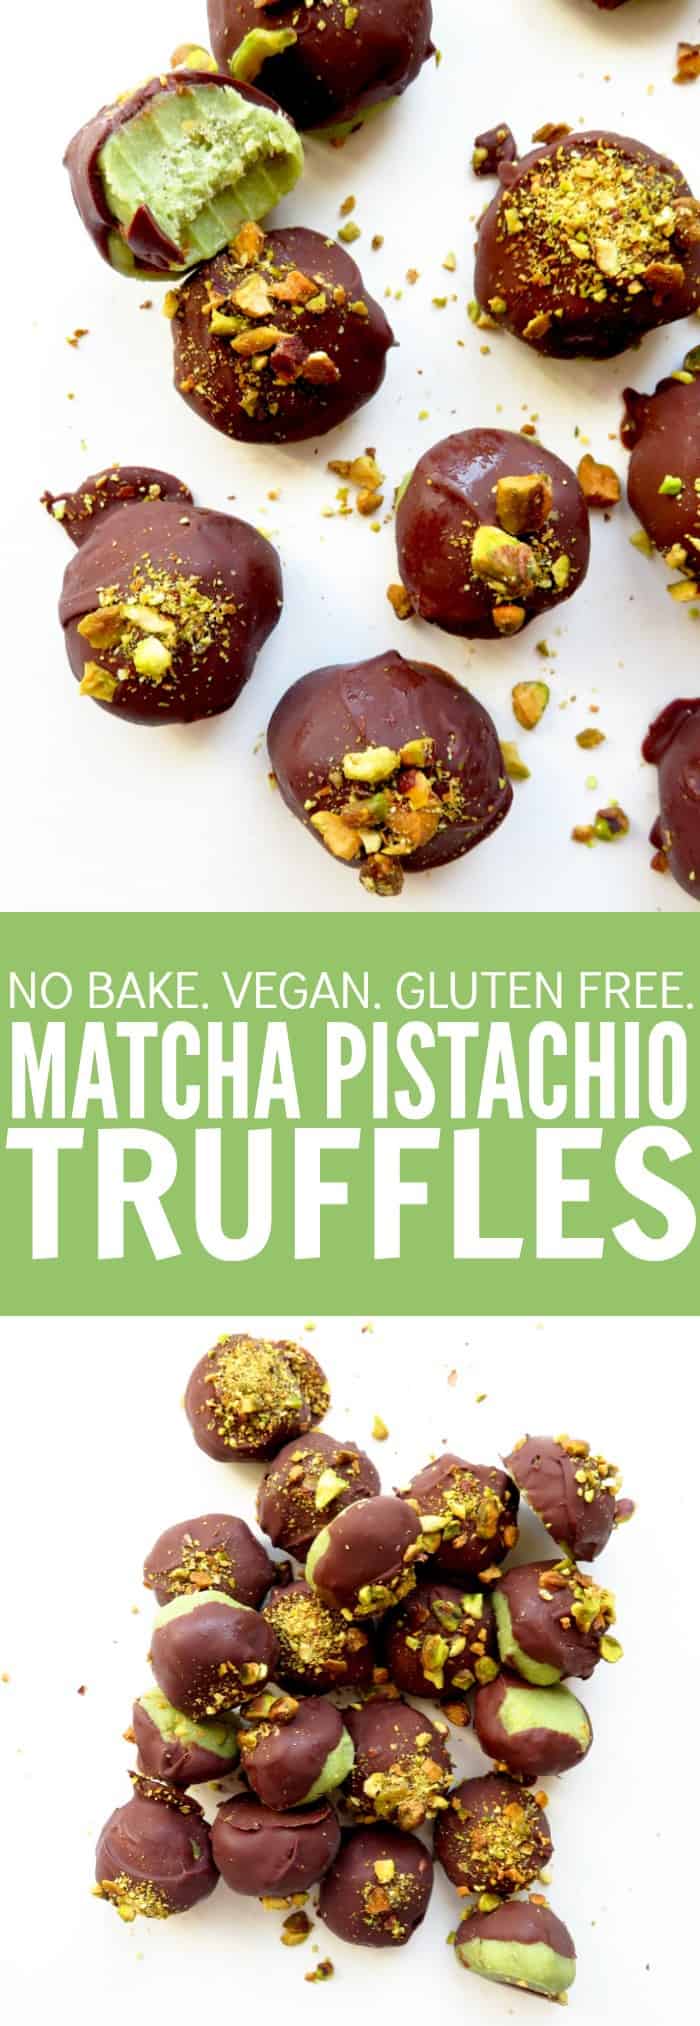 If you're a matcha lover, these no bake, gluten free, and vegan matcha pistachio truffles are your new favorite!! You'll love how easy and fun these are! thetoastedpinenut.com